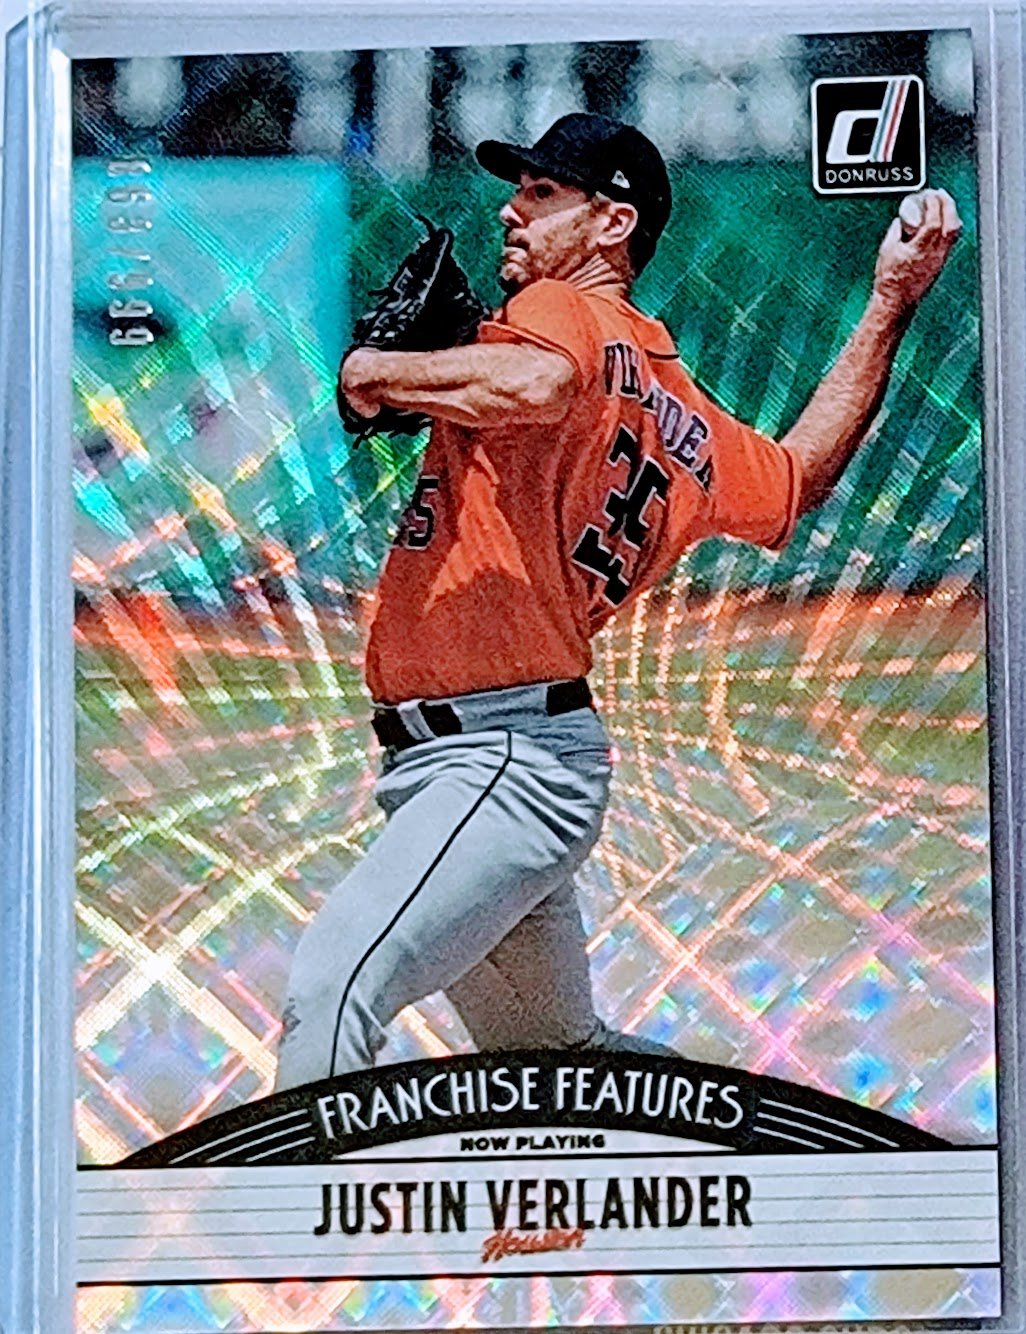 2019 Donruss Justin Verlander Franchise Features #'d/999 Baseball Trading Card TPTV simple Xclusive Collectibles   